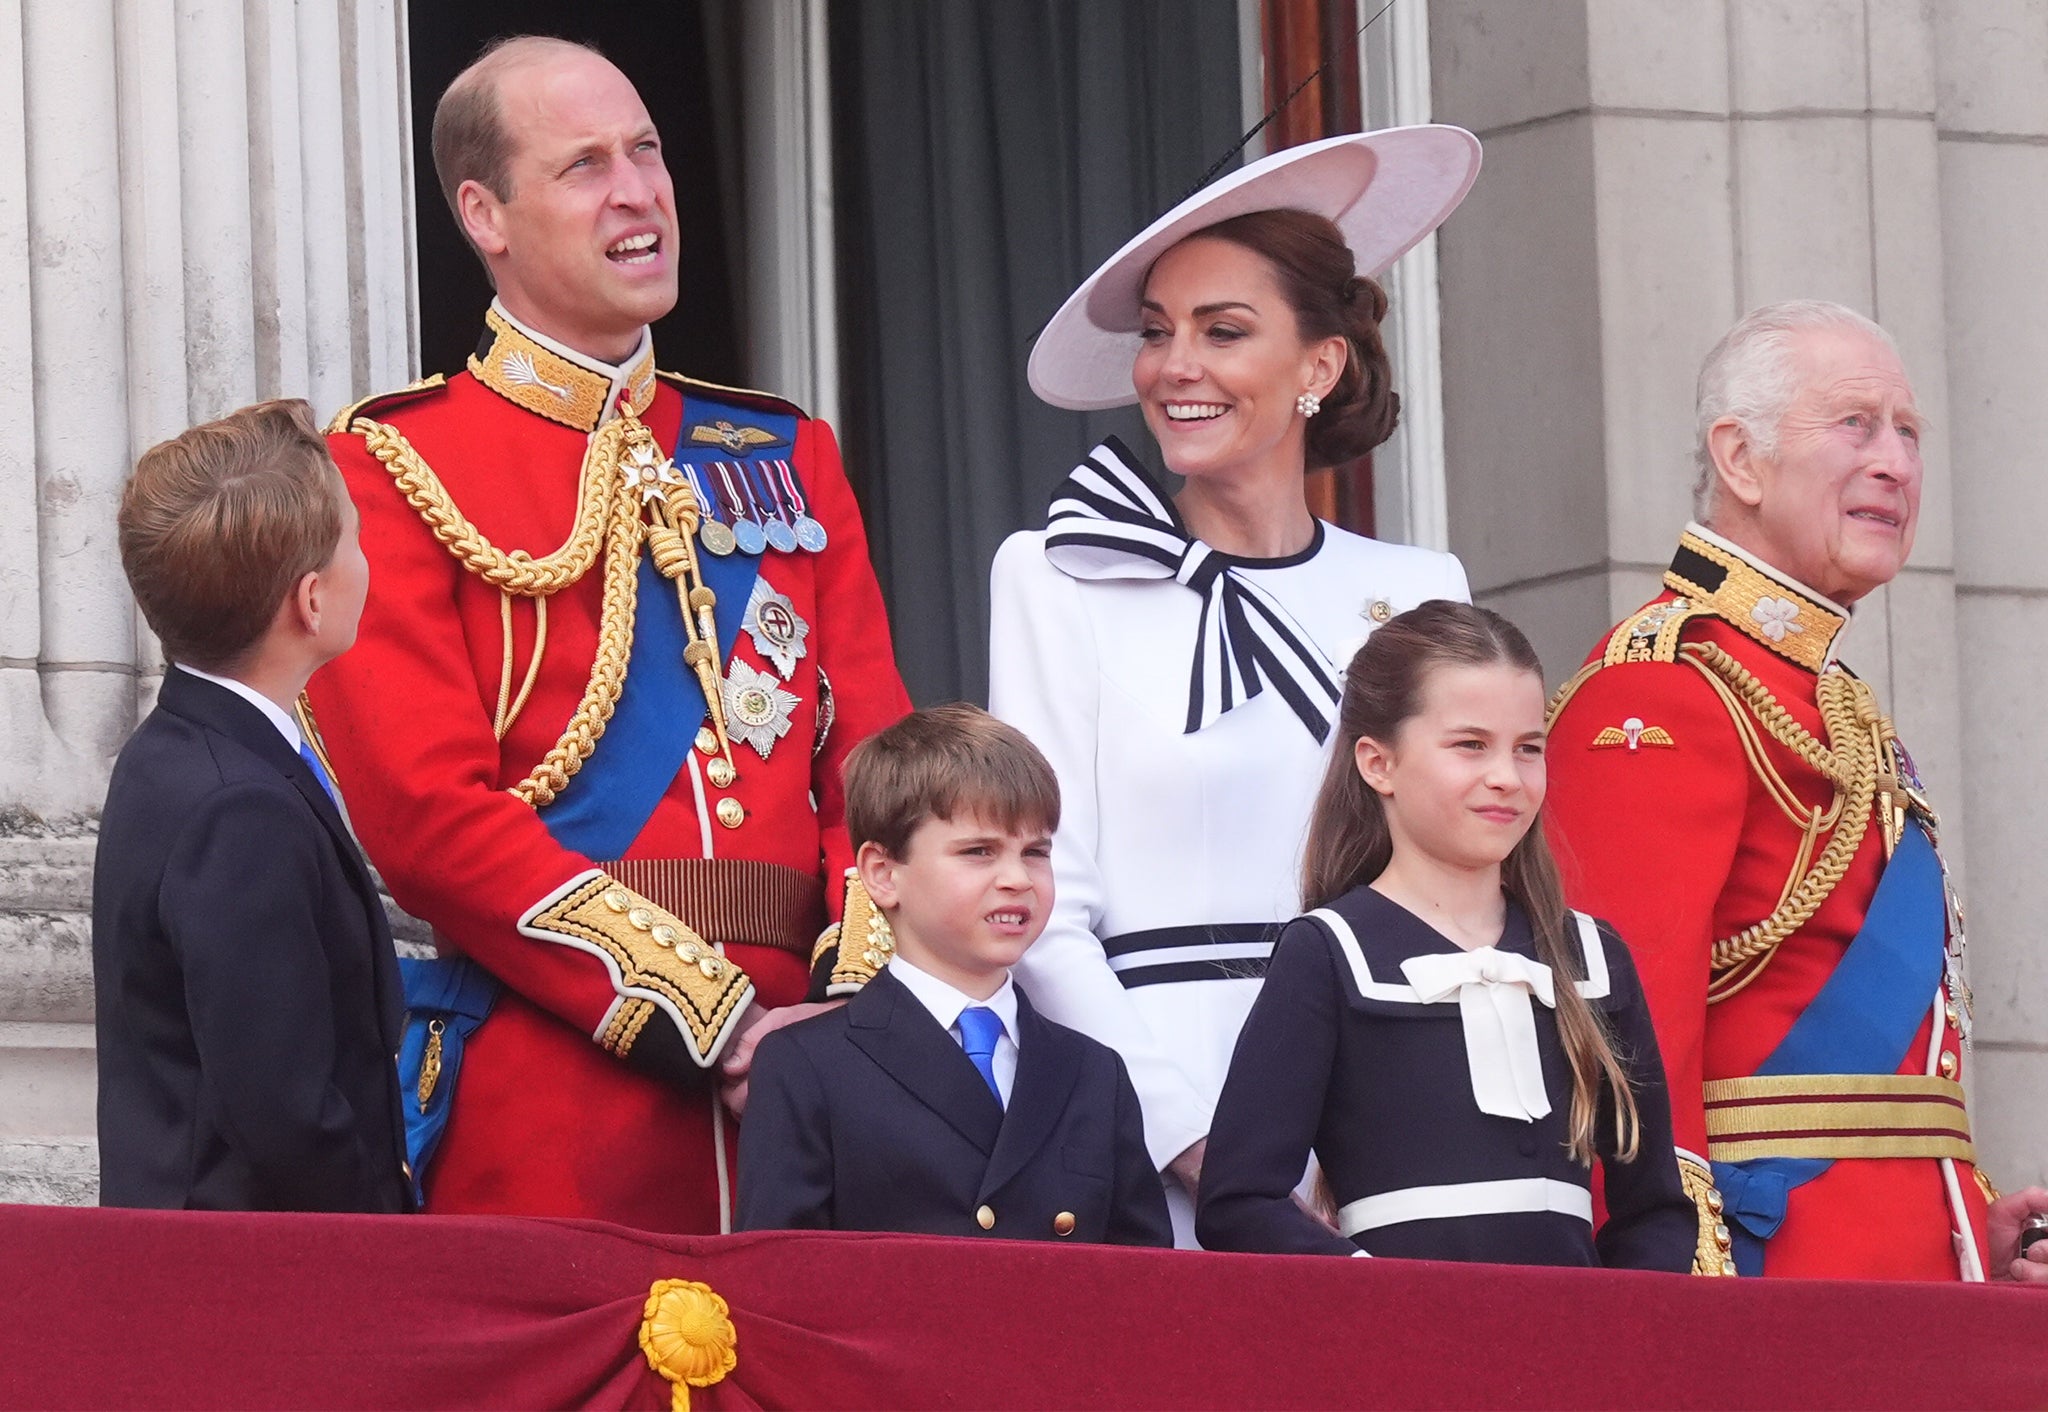 Prince William appeared in public with his wife and children for the first time this year at Trooping the Colour.